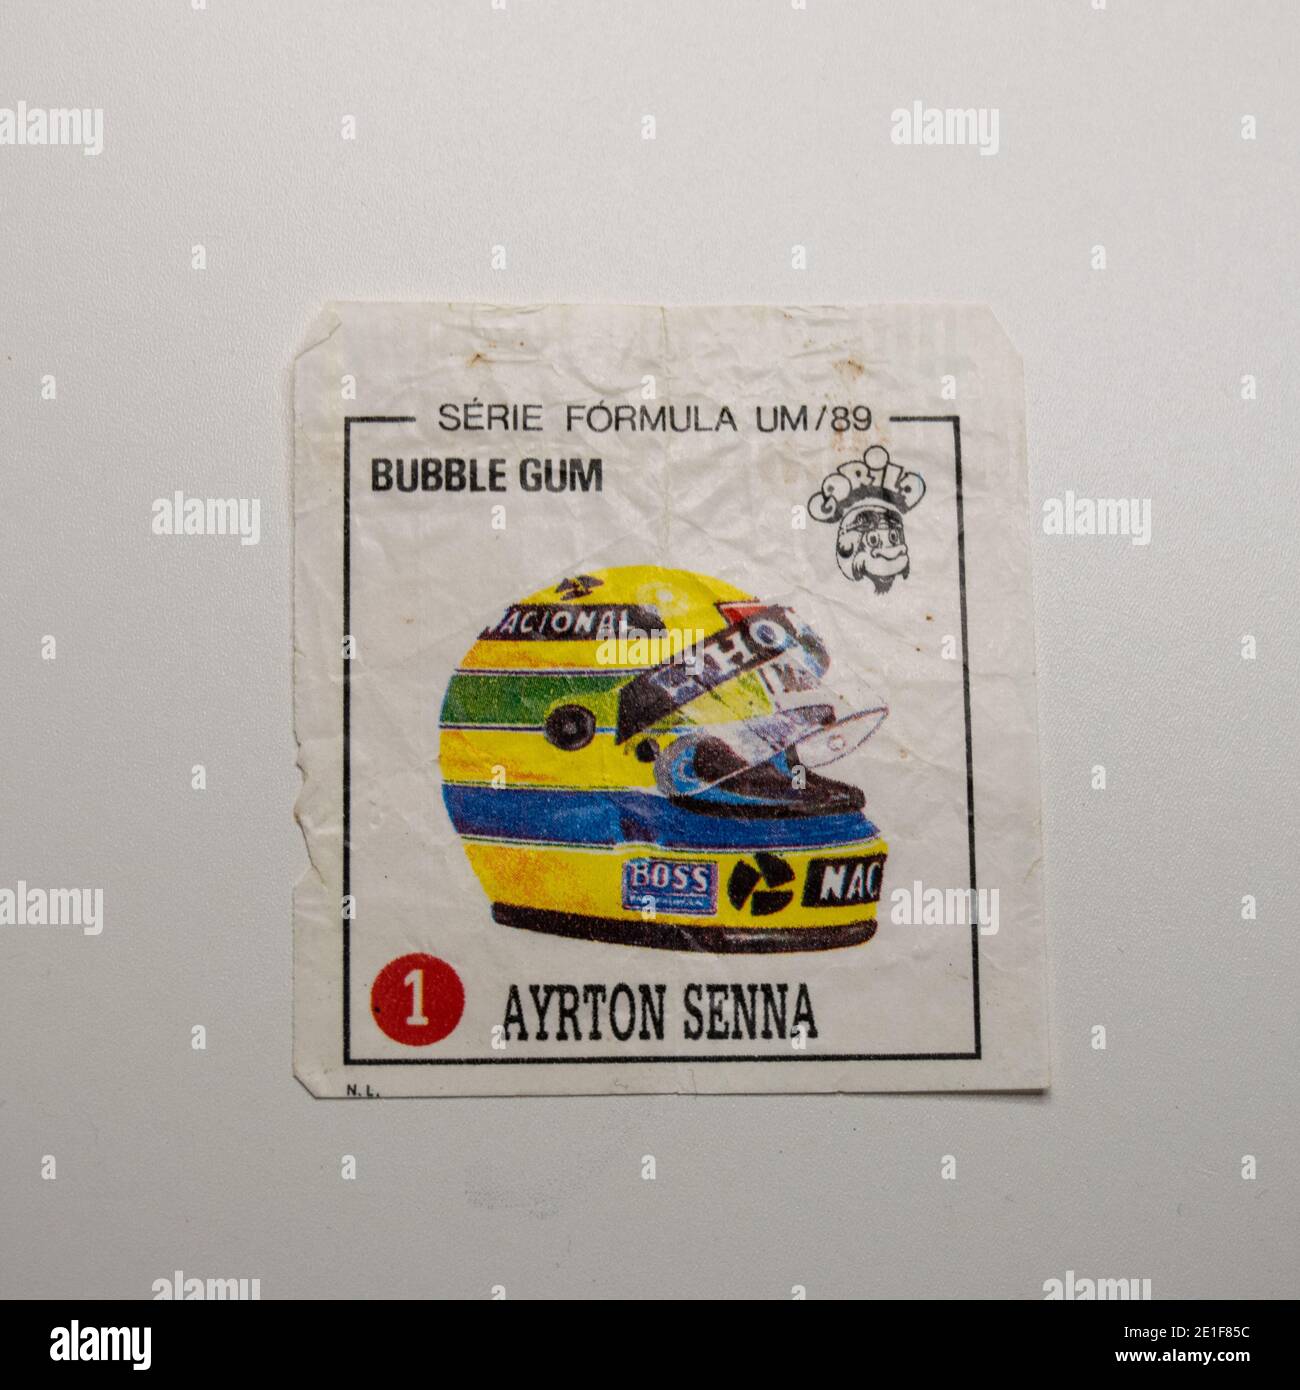 Ayrton Senna 89 collectable prints from Portuguese bubble Gum from gorilla brand Stock Photo